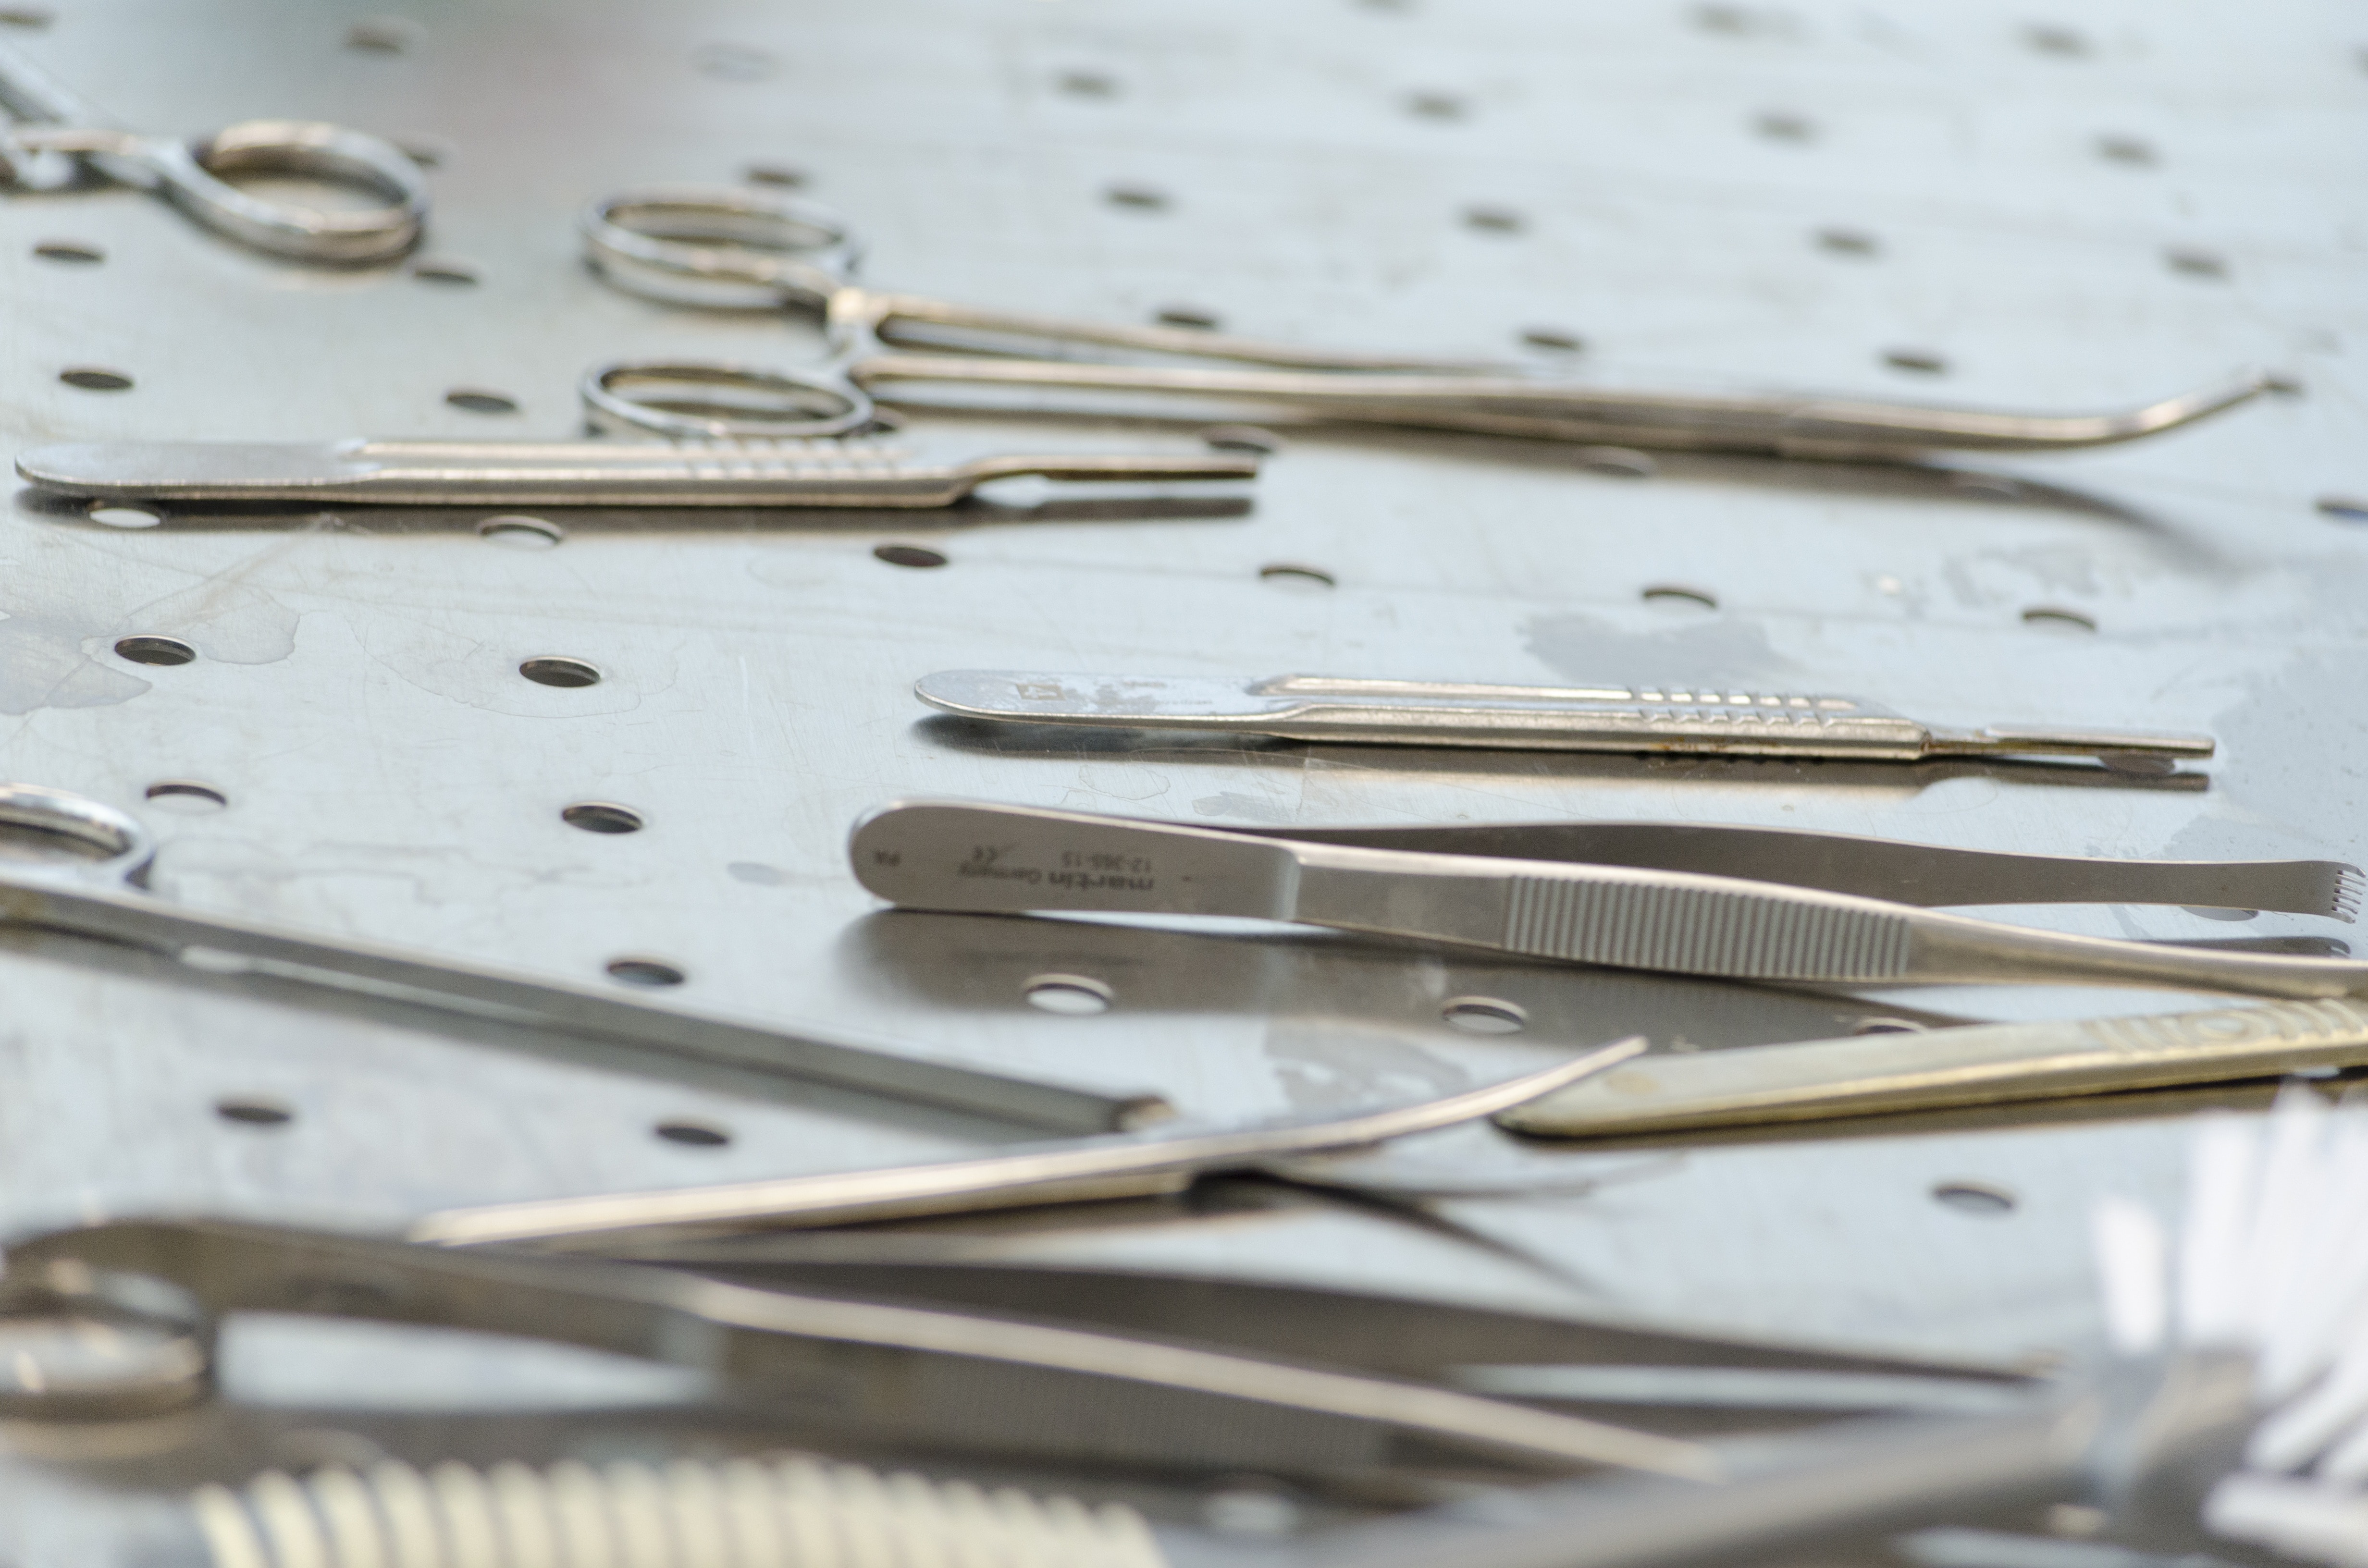 assorted stainless steel medical tools on tray